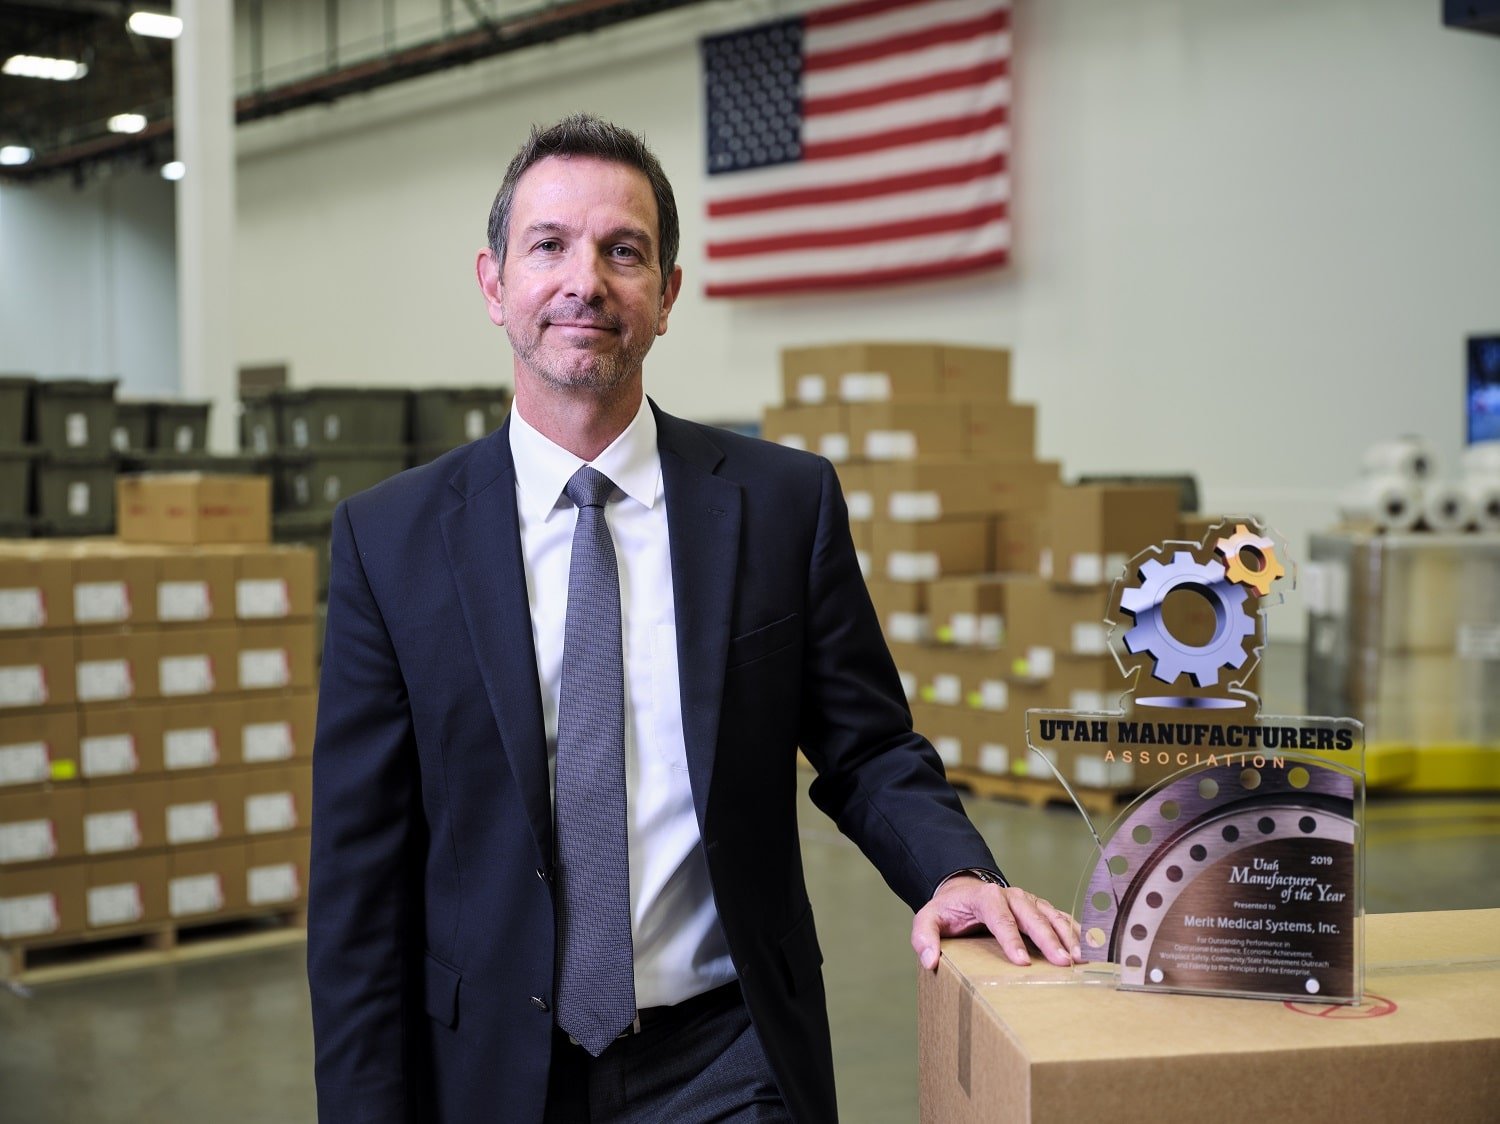 Neil Peterson - Merit Medical - Vice President Operations - Manufacturer of the Year 2019 Award